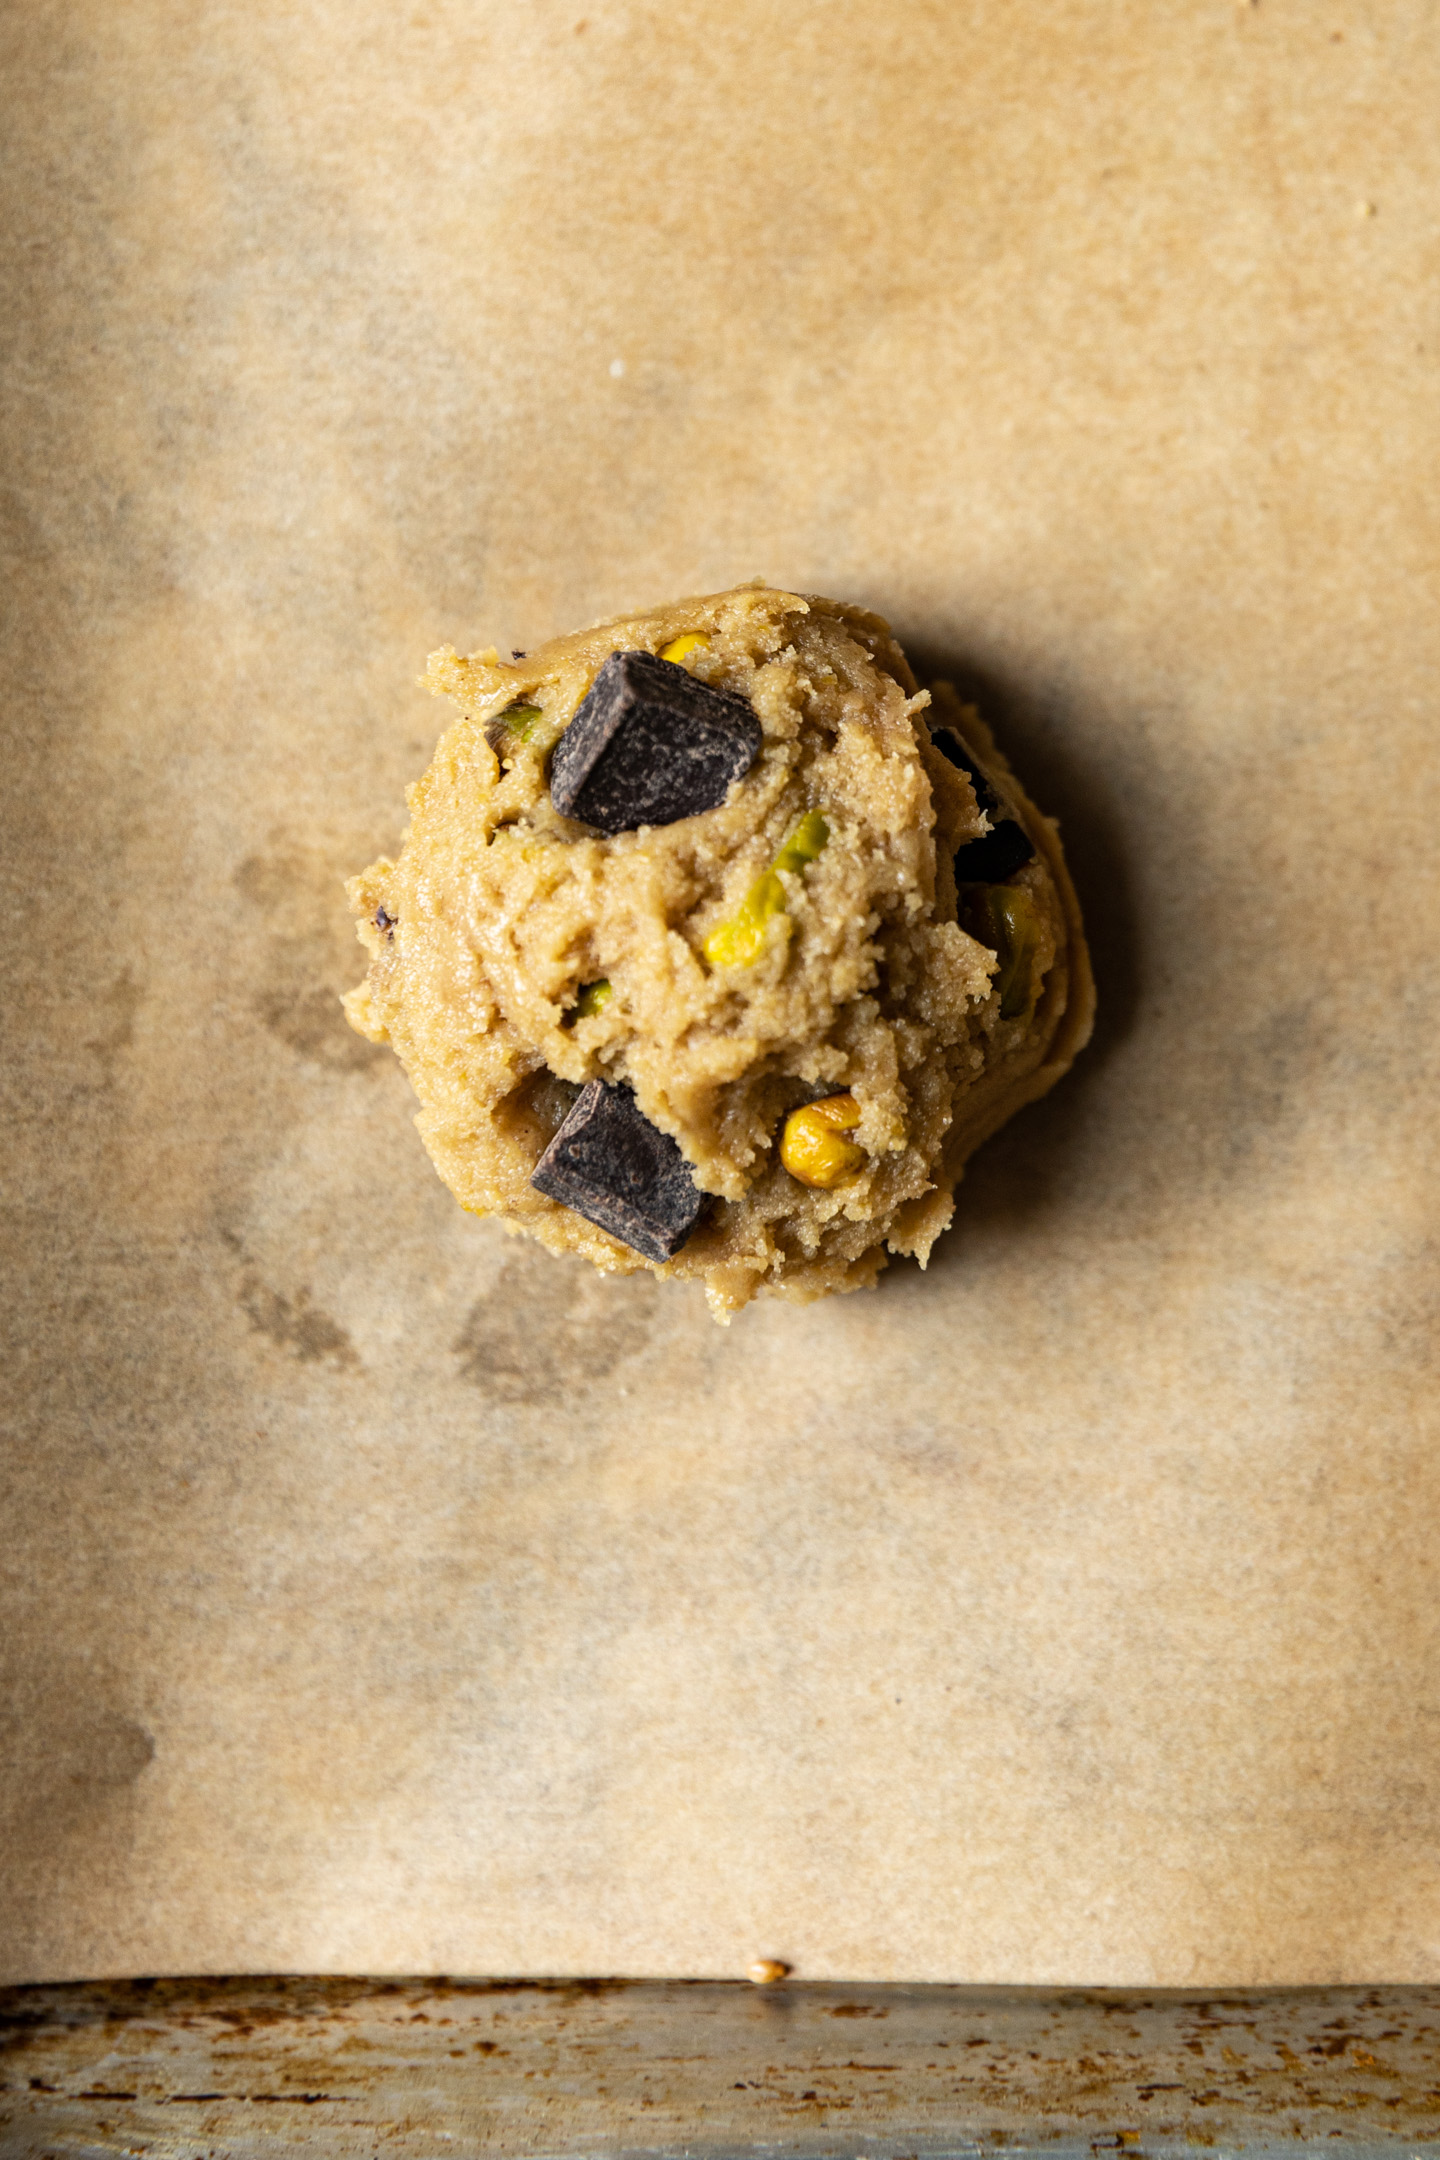 Pistachio and chocolate cookie dough ball on parchment paper.